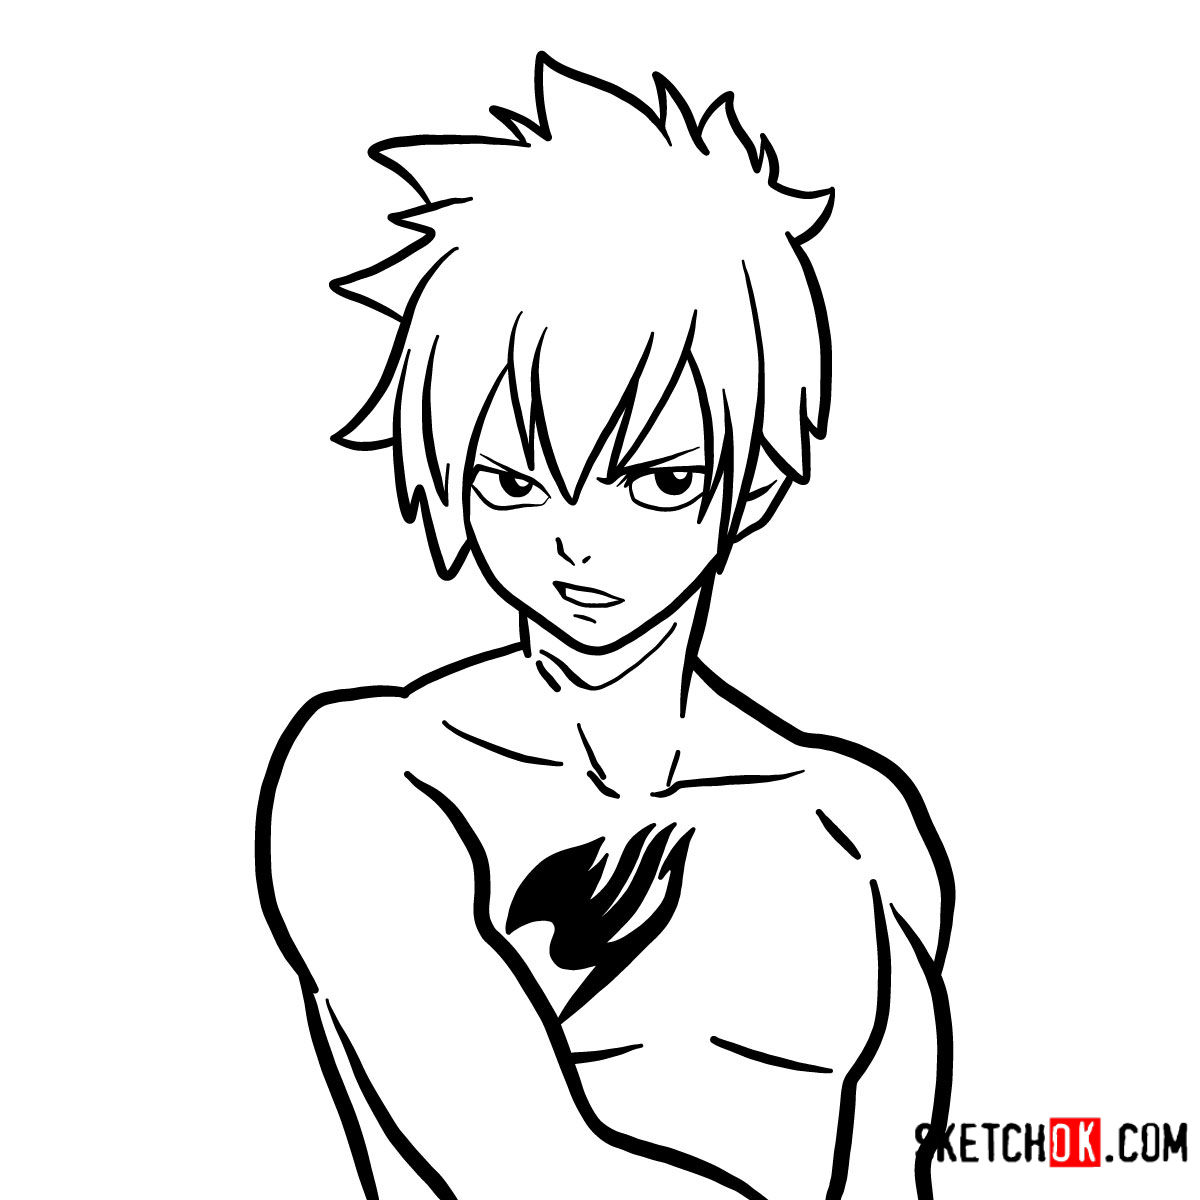 How to draw Gray Fullbuster's face   Fairy Tail   Sketchok easy ...